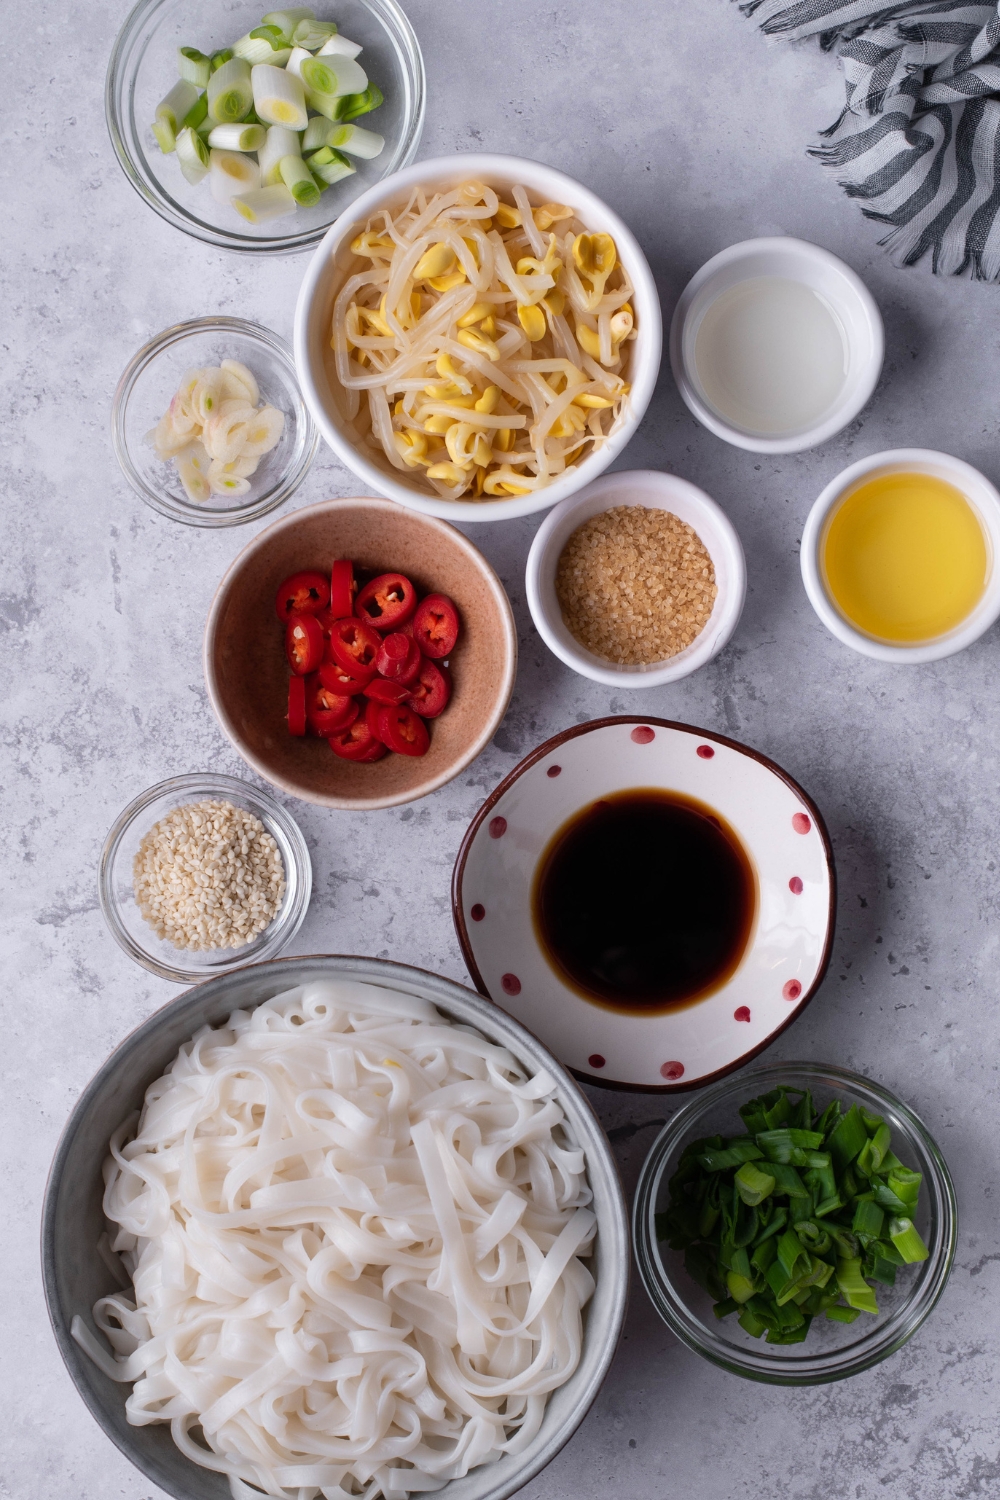 An overhead view of multiple bowls with the ingredients to make spicy noodles.